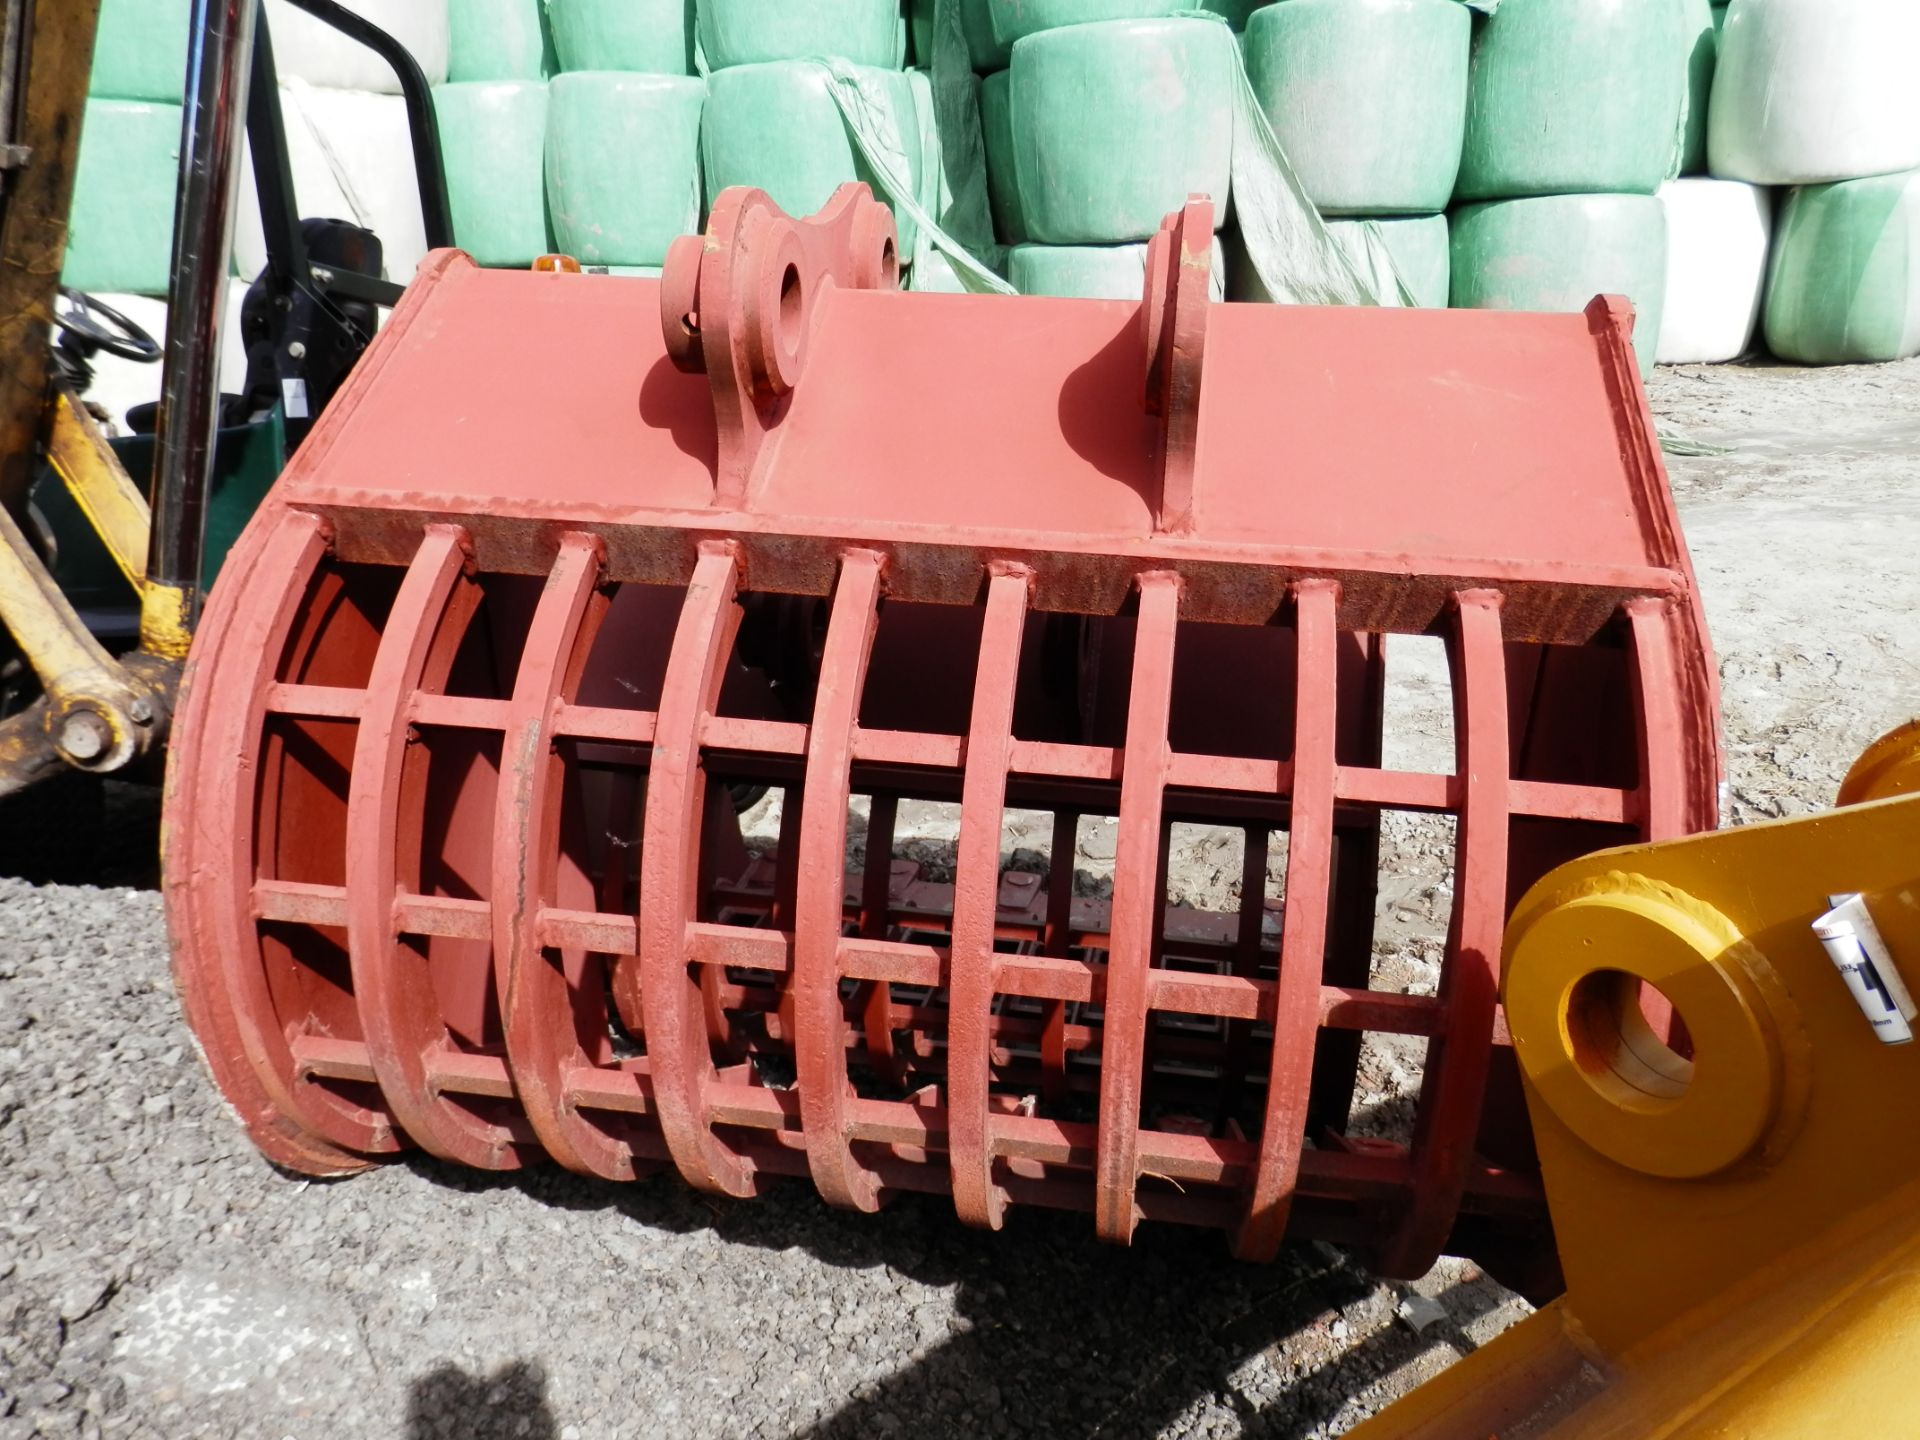 DS - 1 X RIDDLE BUCKET TO FIT KOMATSU DIGGER. NEW & UNUSED.   LISTING IS FOR 1 X RIDDLE BUCKET AS - Bild 2 aus 3